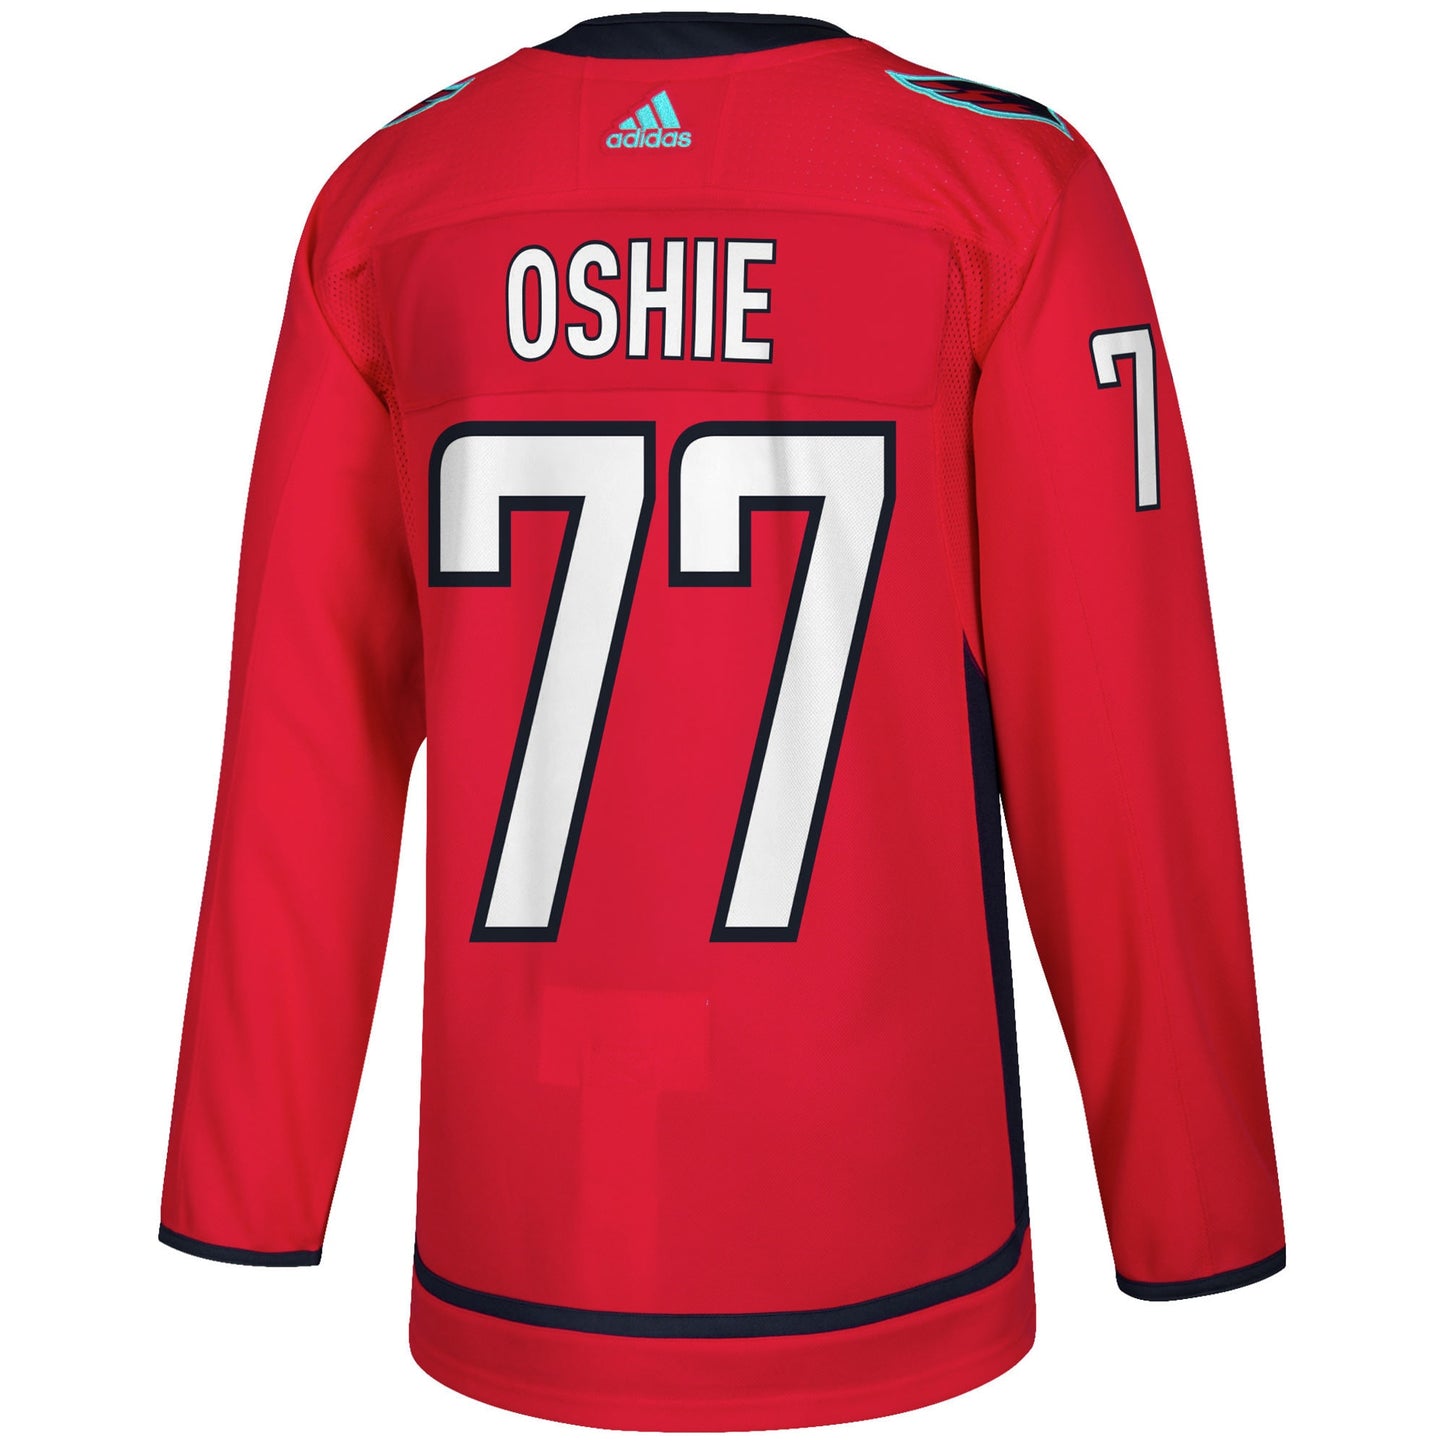 TJ Oshie Washington Capitals adidas Authentic Player Jersey - Red